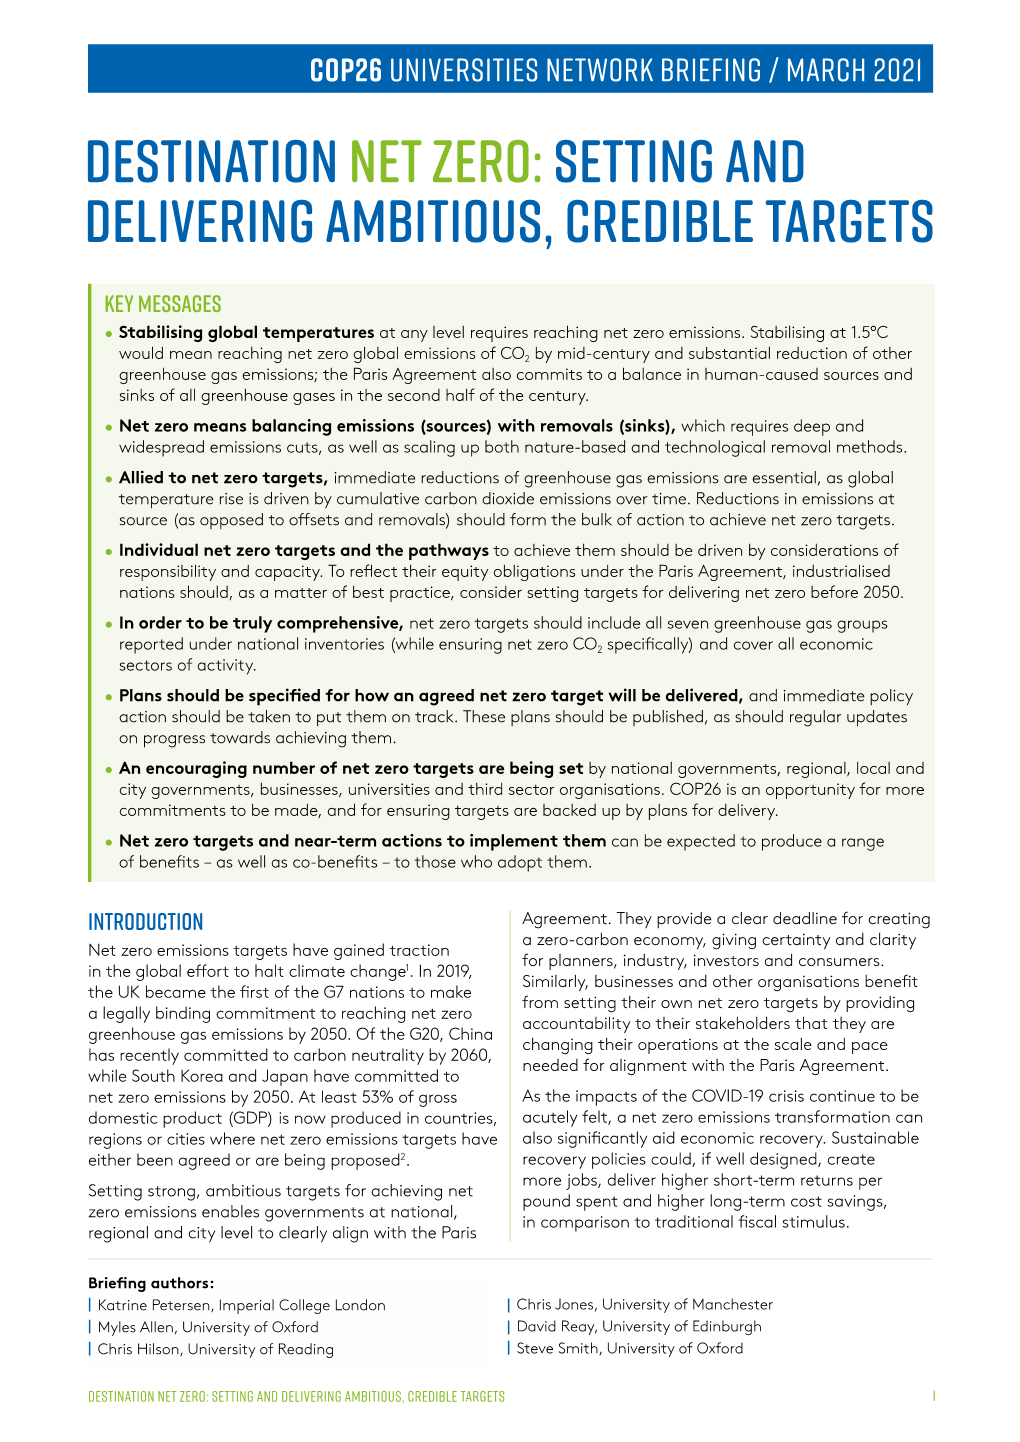 Destination Net Zero:Setting and Delivering Ambitious, Credible Targets